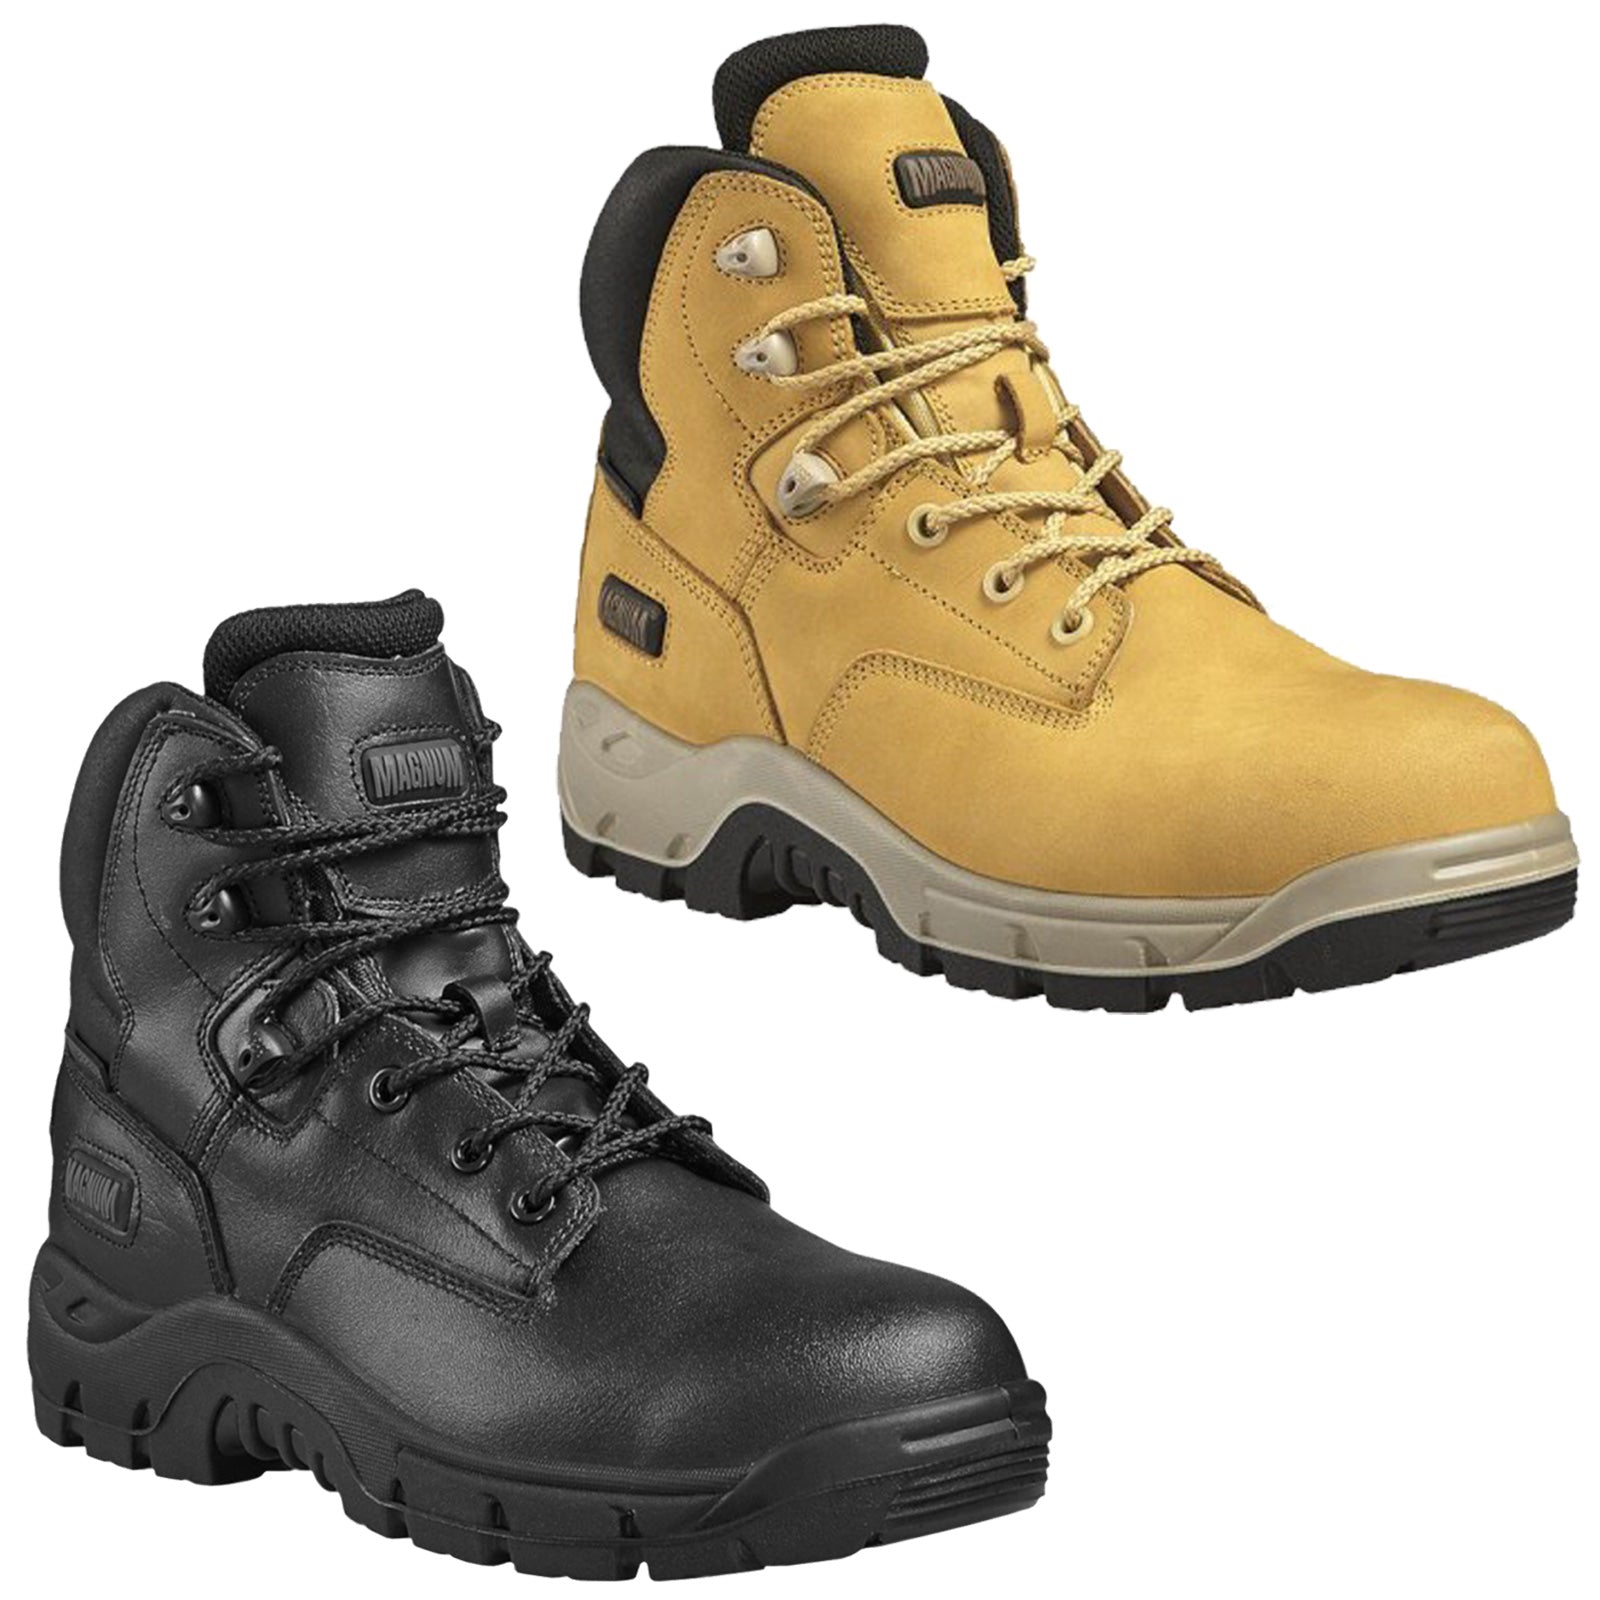 Magnum Mens Precision Sitemaster Composite Toe Waterproof Safety Boots